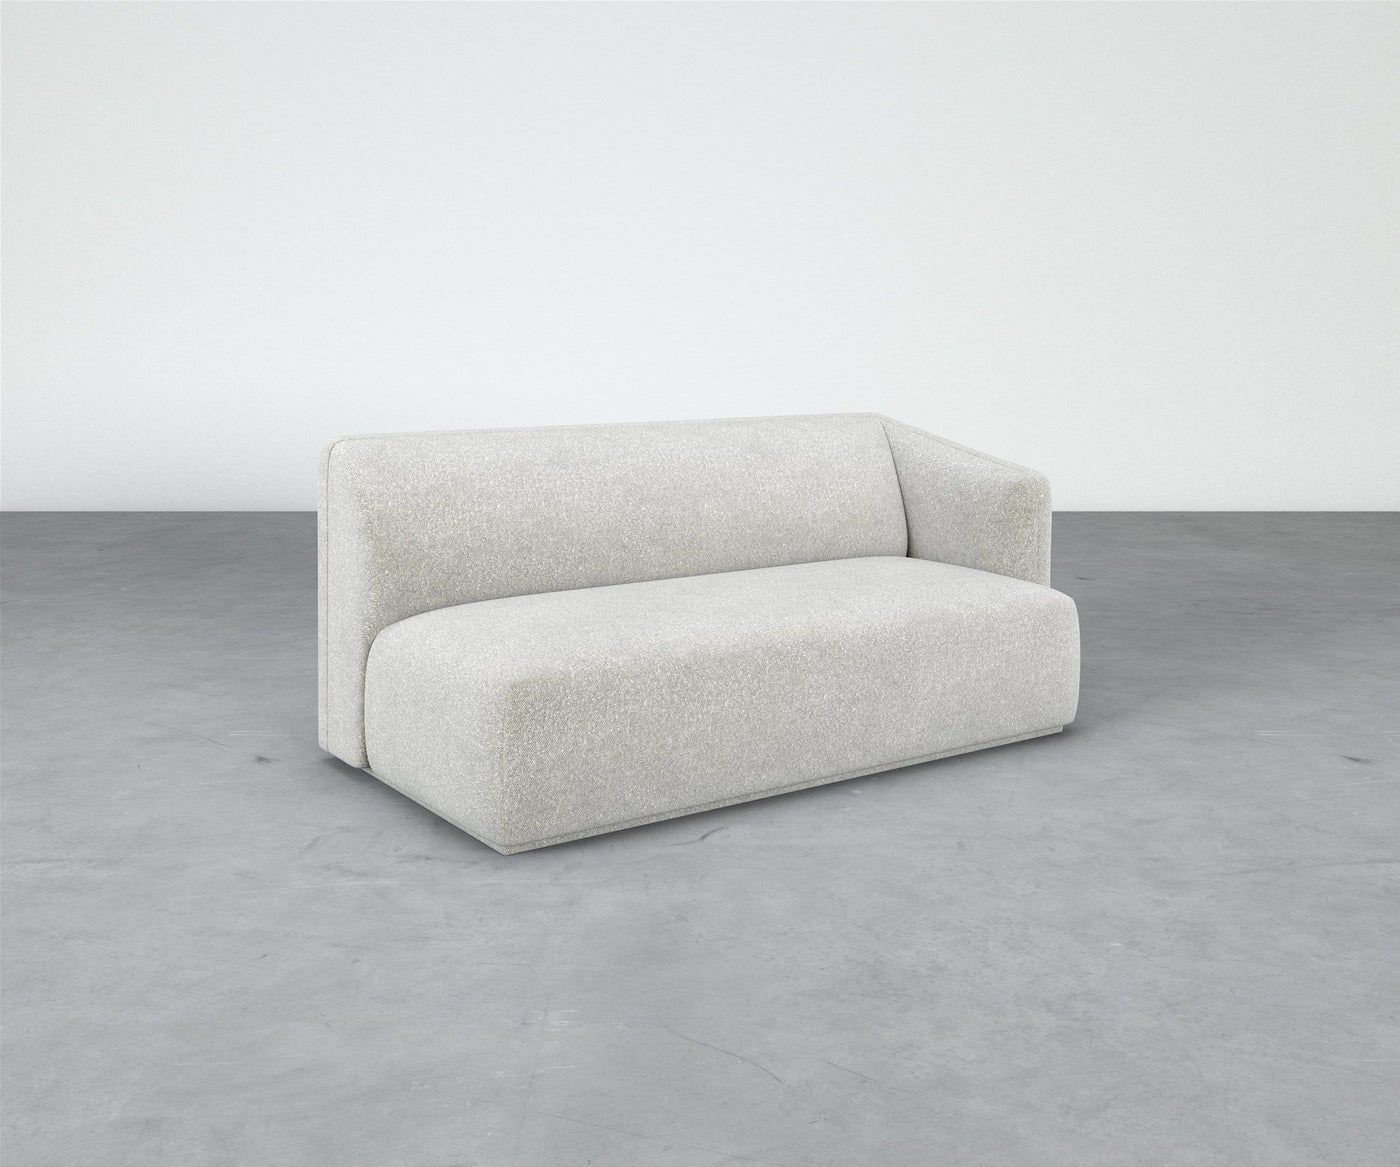 Formal Mallo One-Arm Sofa 69" - Modular Component #base_recessed-fabric-wrapped